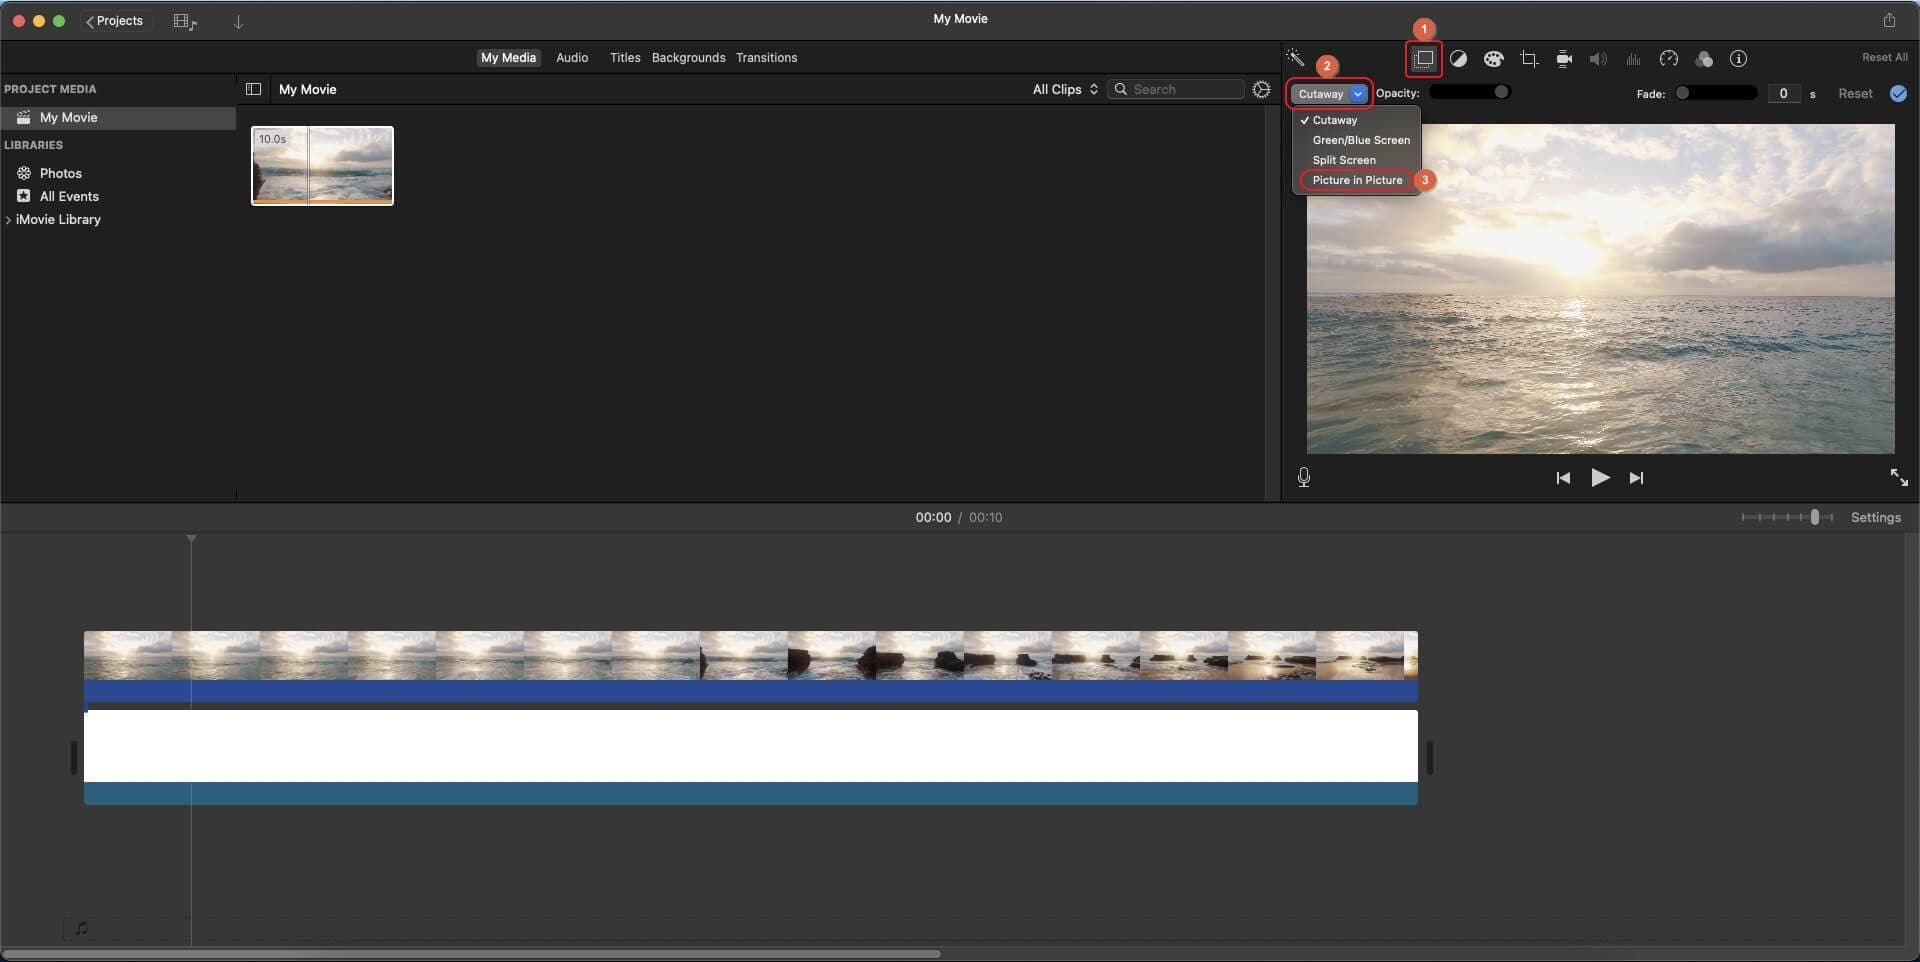 imovie overlay picture in picture option